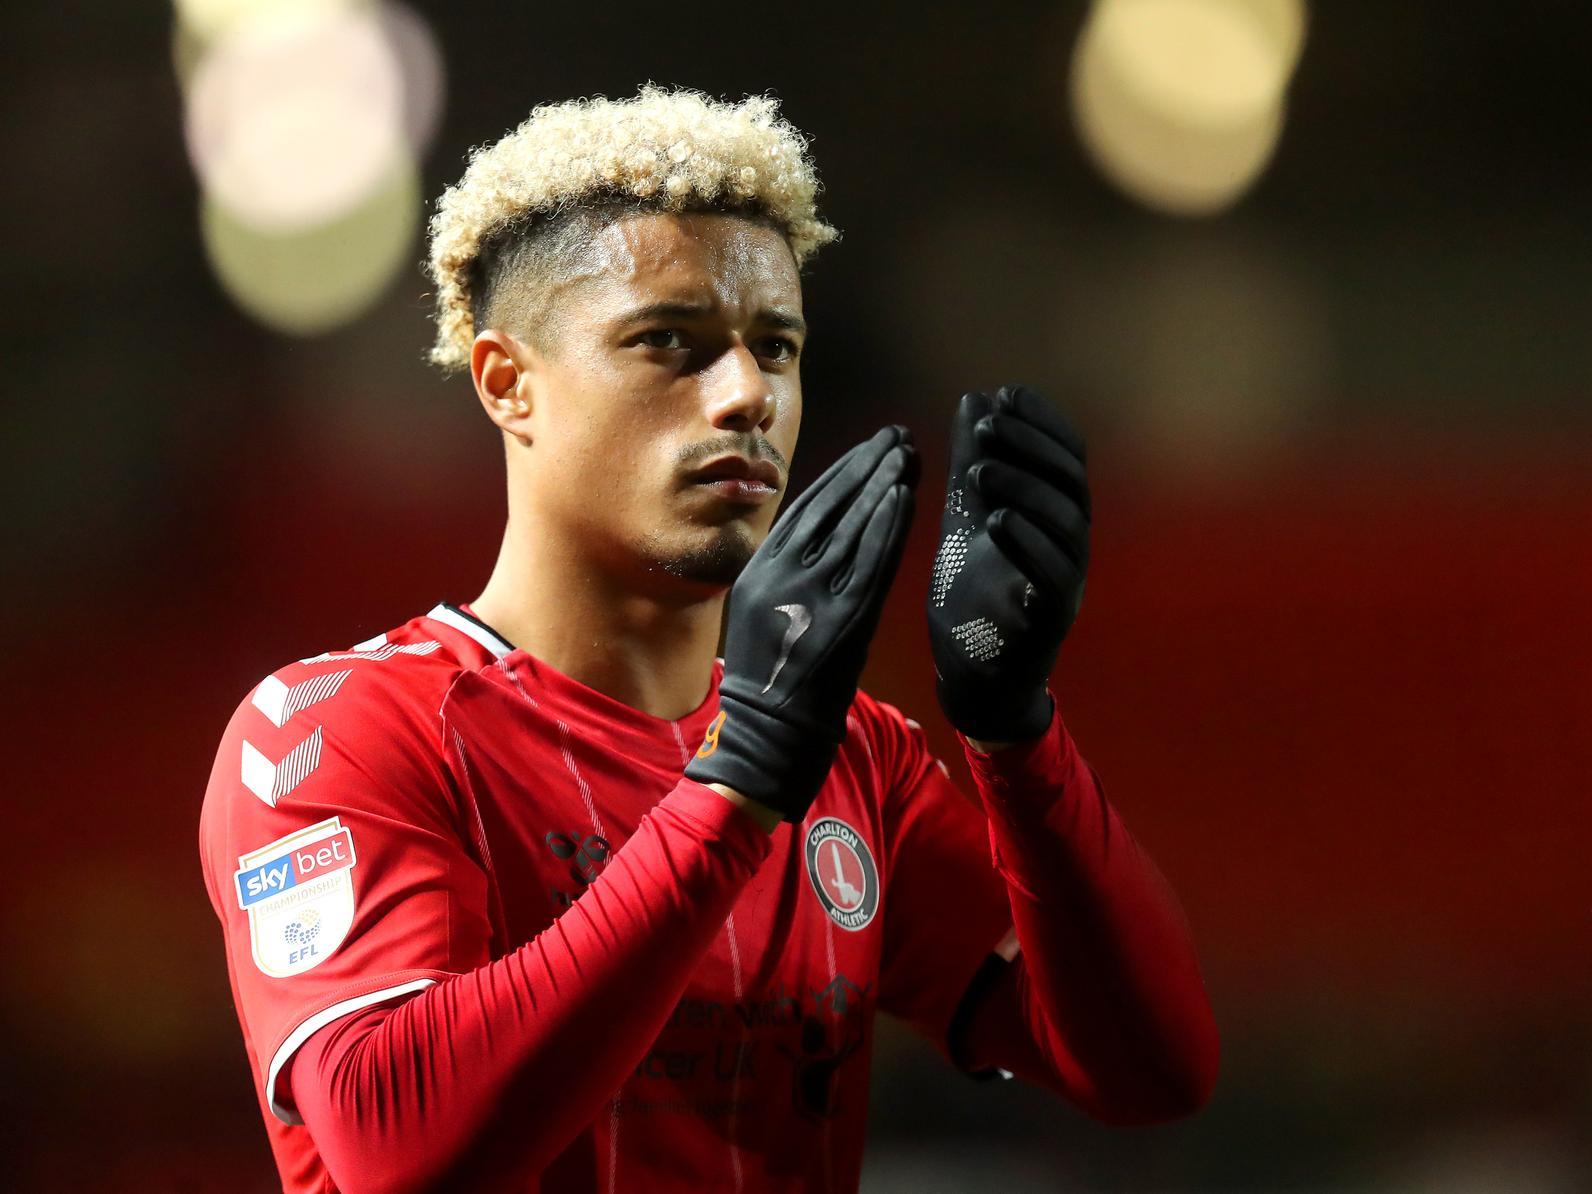 Charlton Athletic boss Lee Bowyer has publicly urged striker Lyle Taylor, who has previously been linked with Sheffield Wednesday to sign a new deal with the club. His contract expires in June. (South London Press)